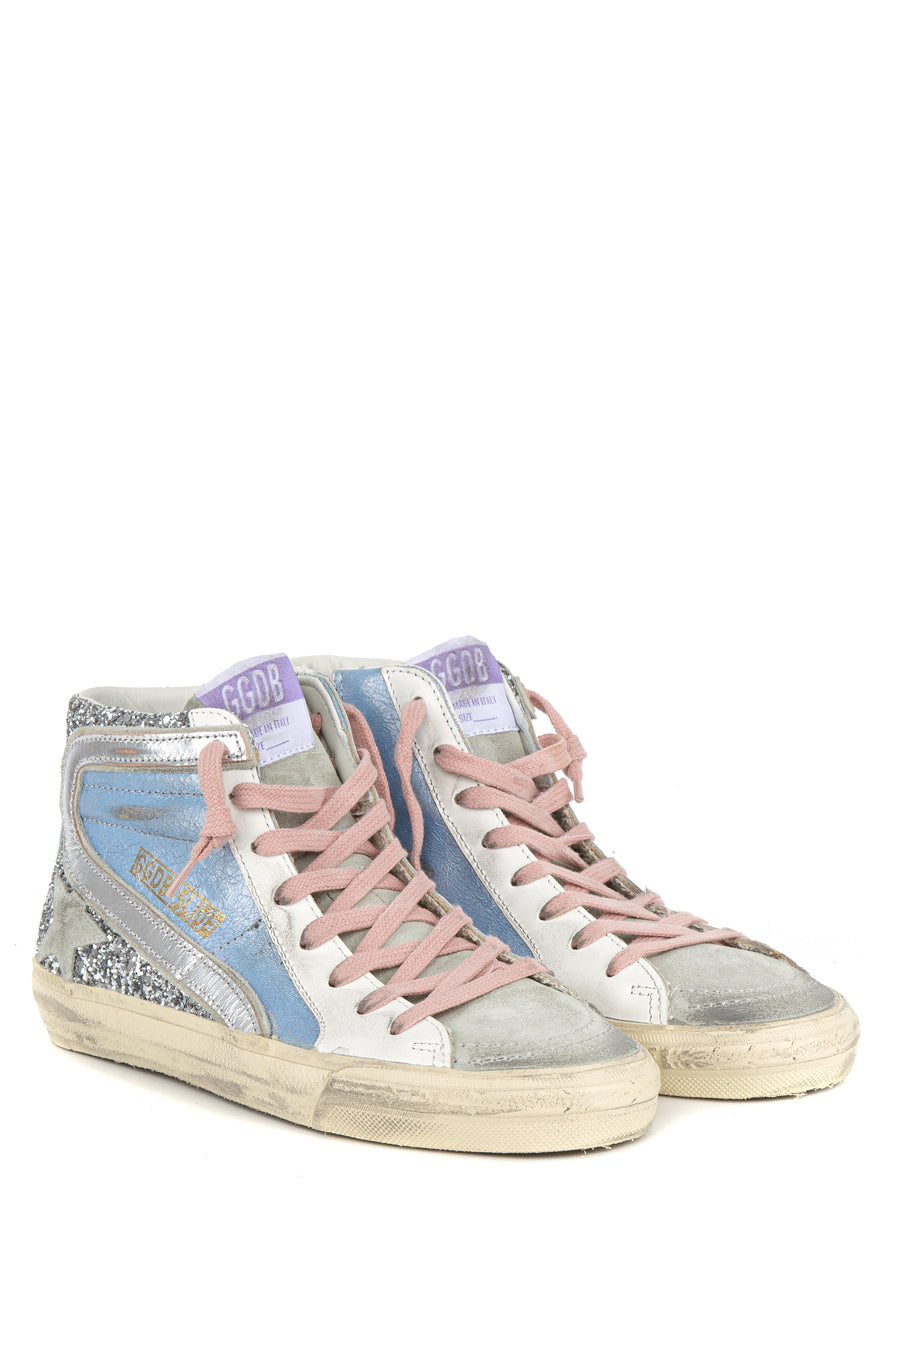 Slide High-Top Sneakers, silver glitter & light blue leather